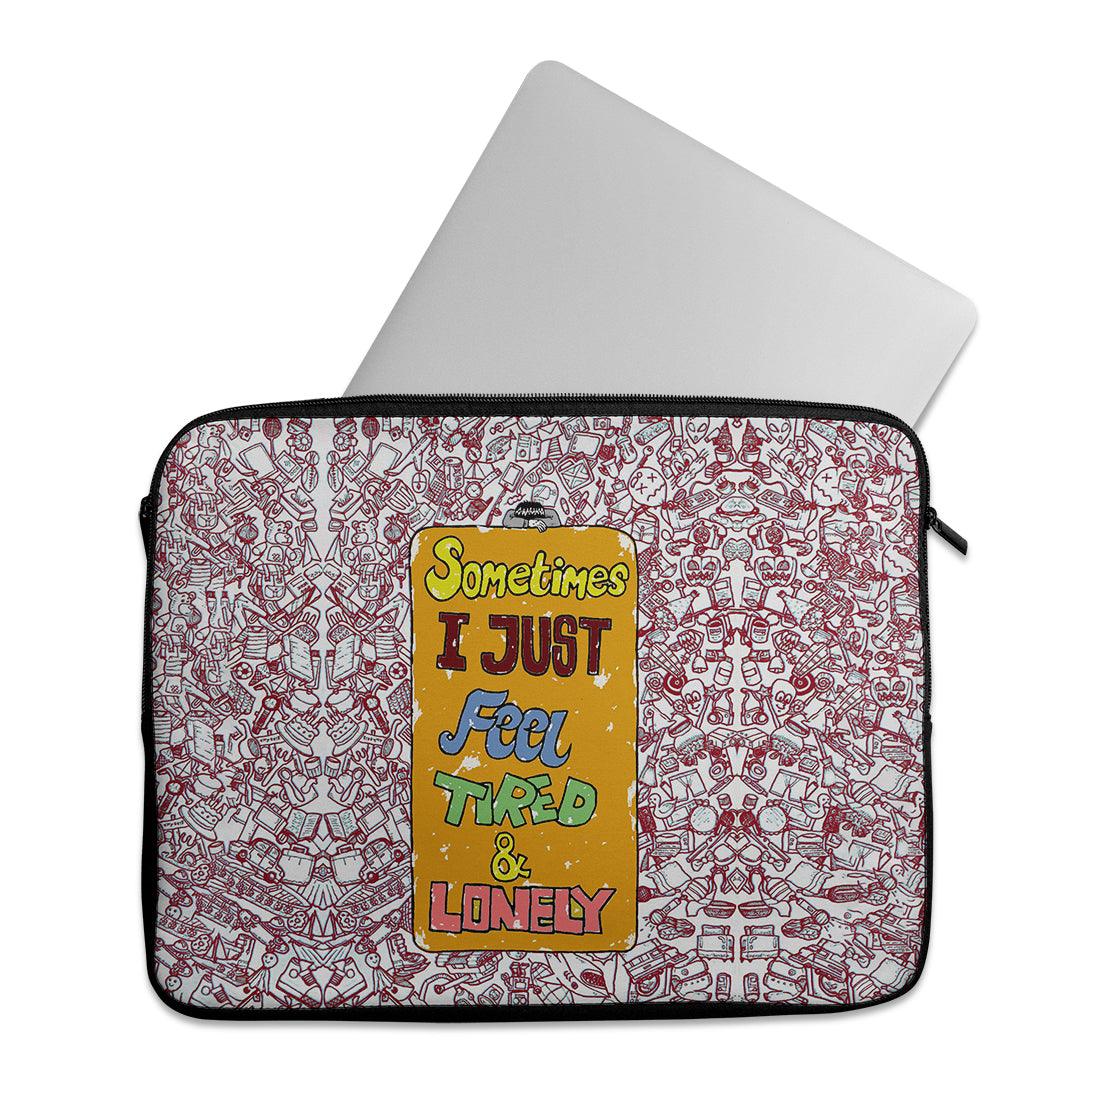 Laptop Sleeve Lone syndrome